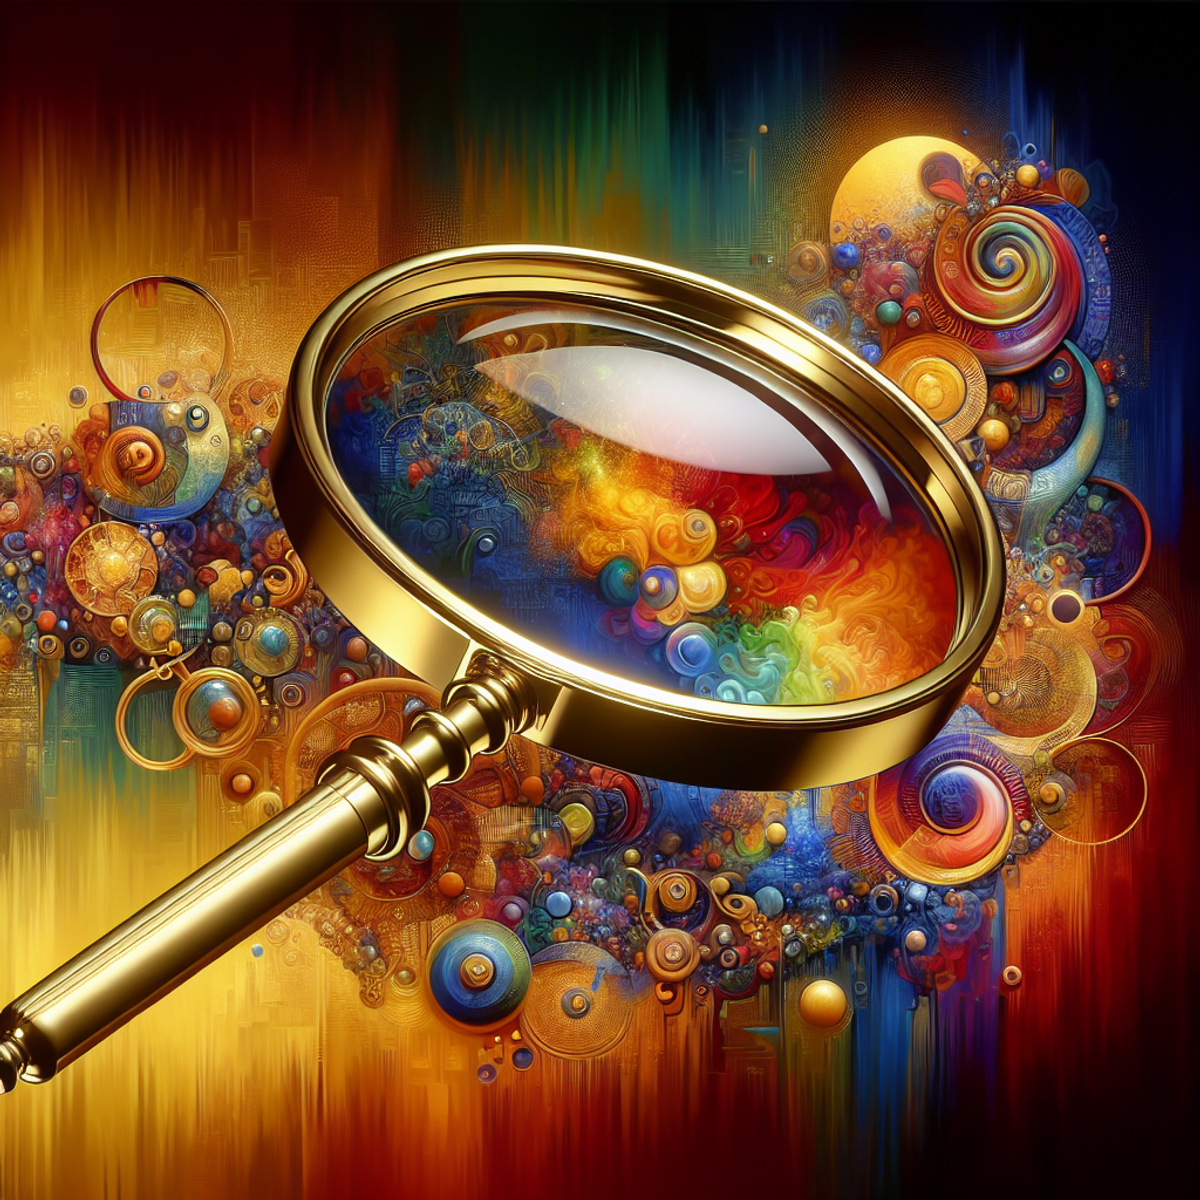 A golden magnifying glass hovering over a vibrant and colorful abstract artwork.